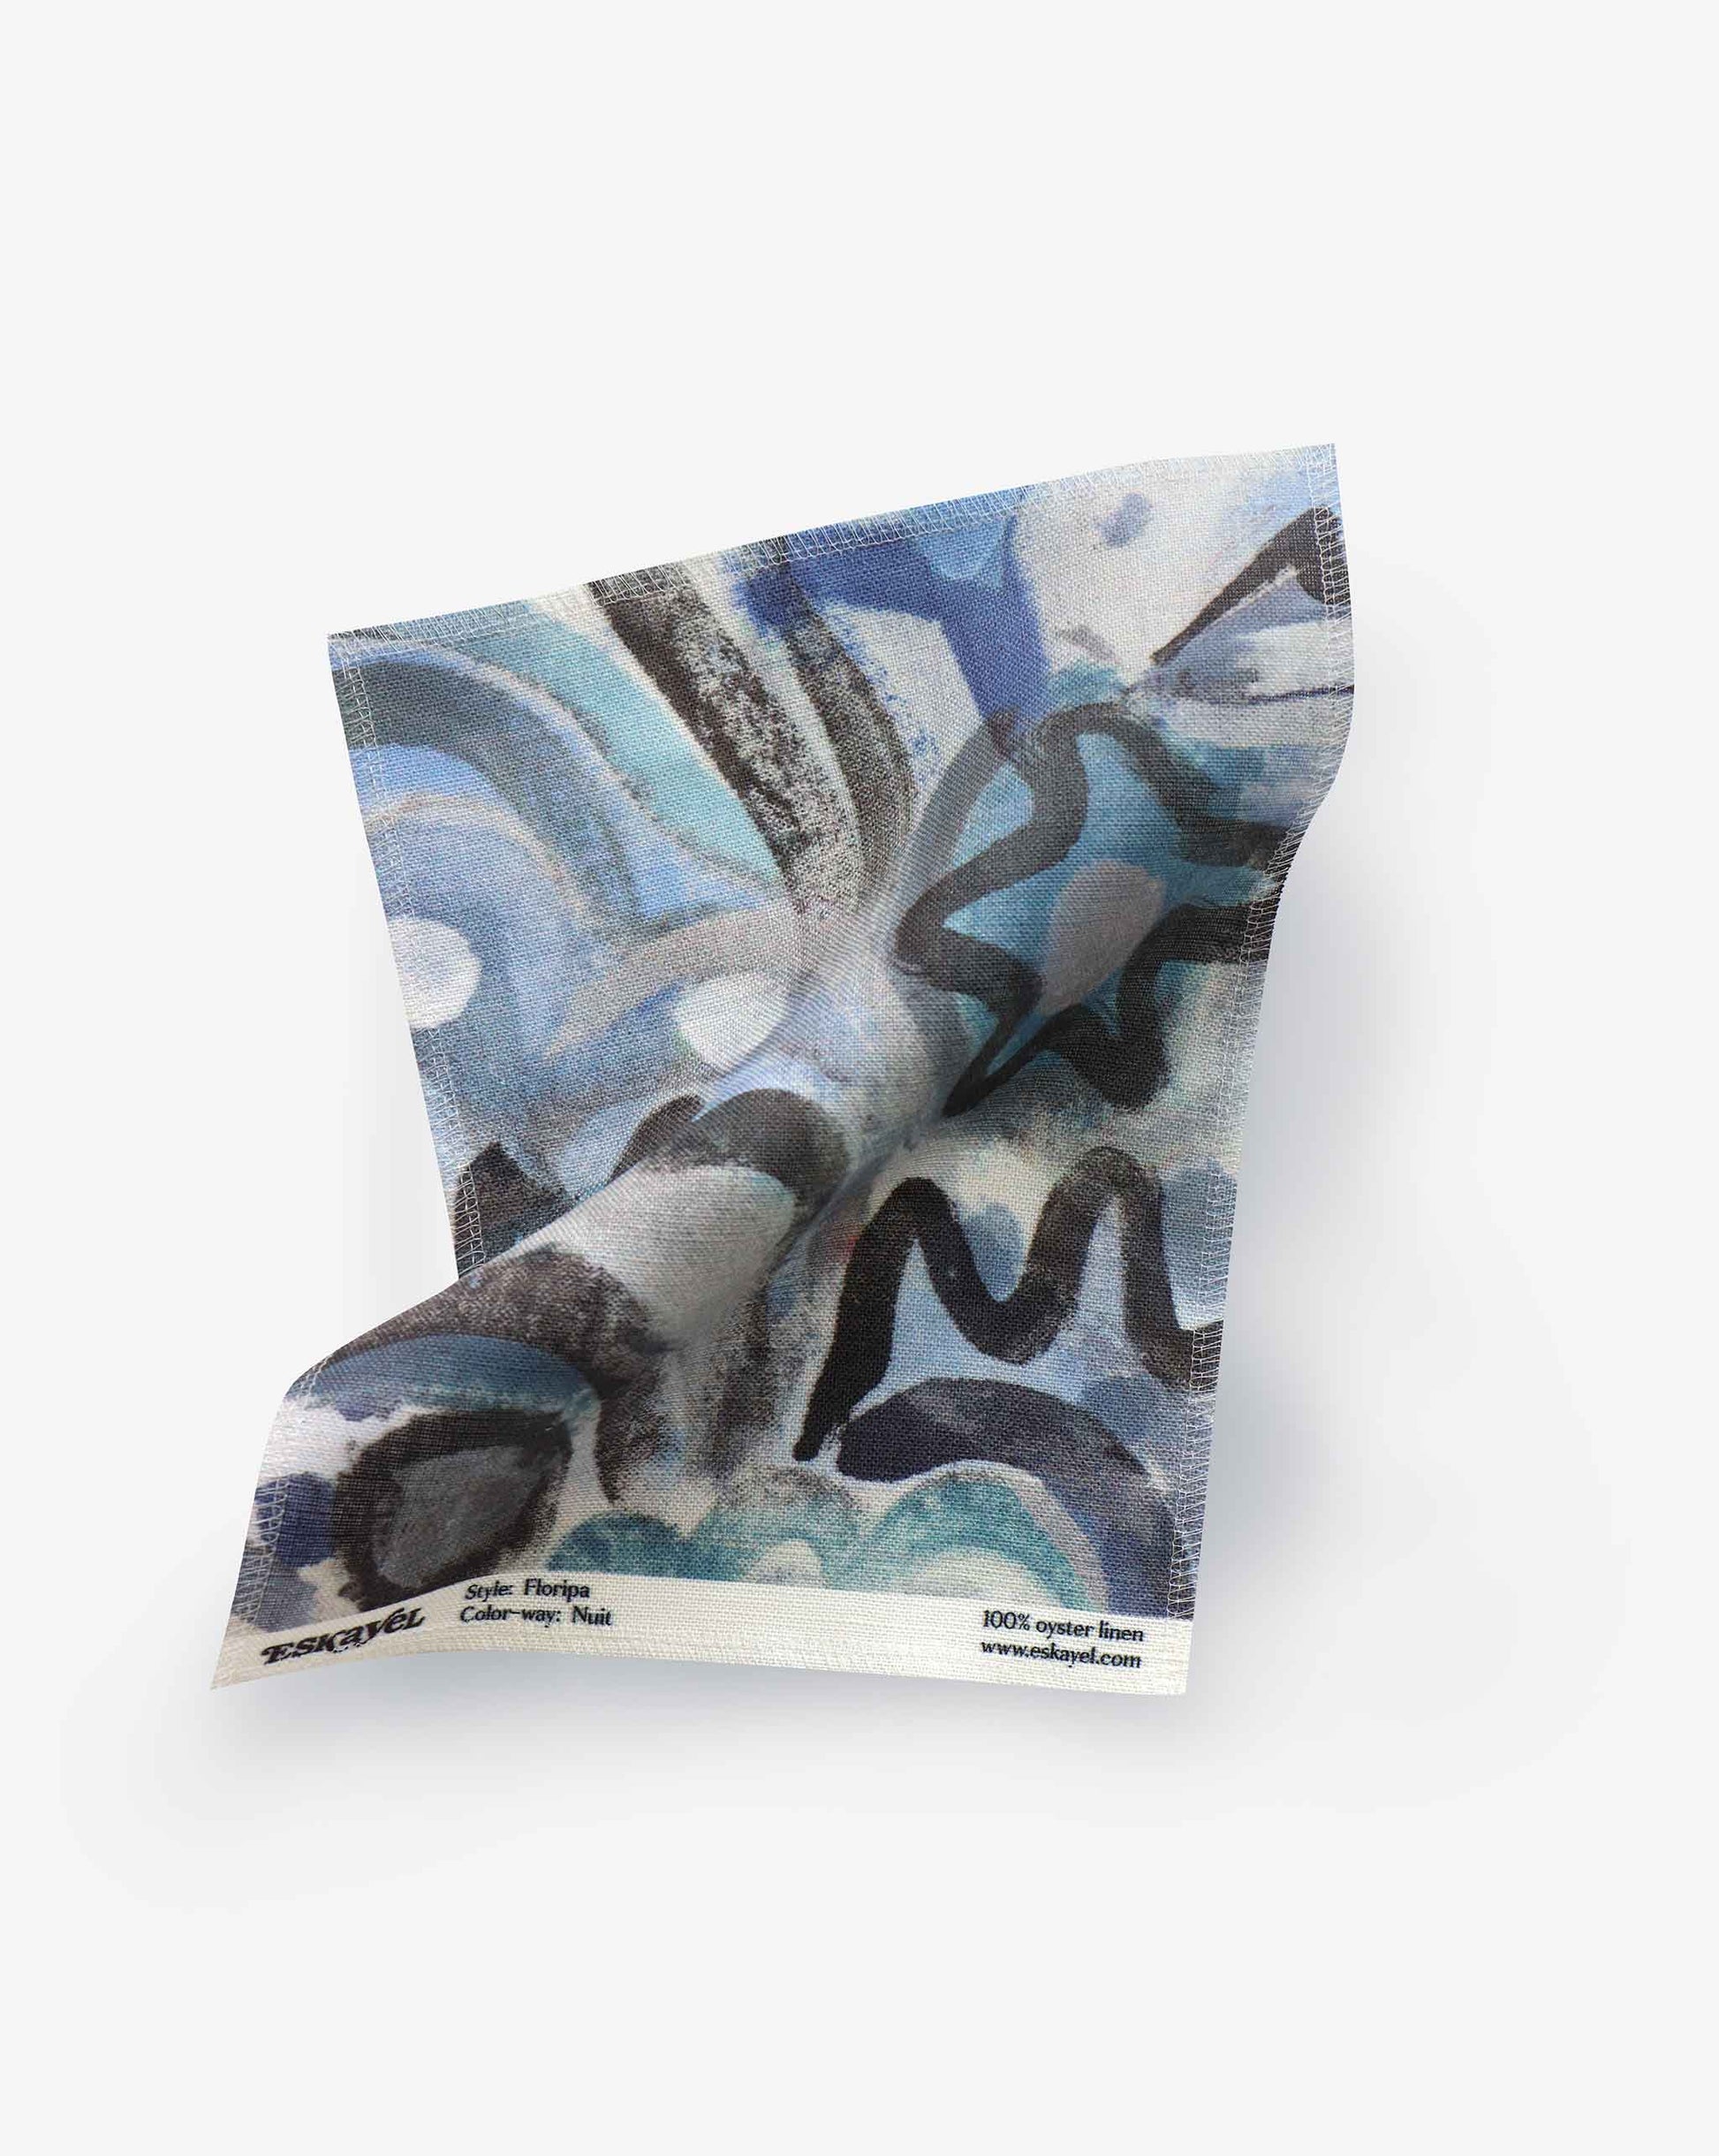 A fabric swatch with our Floripa pattern in Nuit featuring a design inspired by the beautiful tropical island of Florianopolis in Brazil that has a palette of blues.